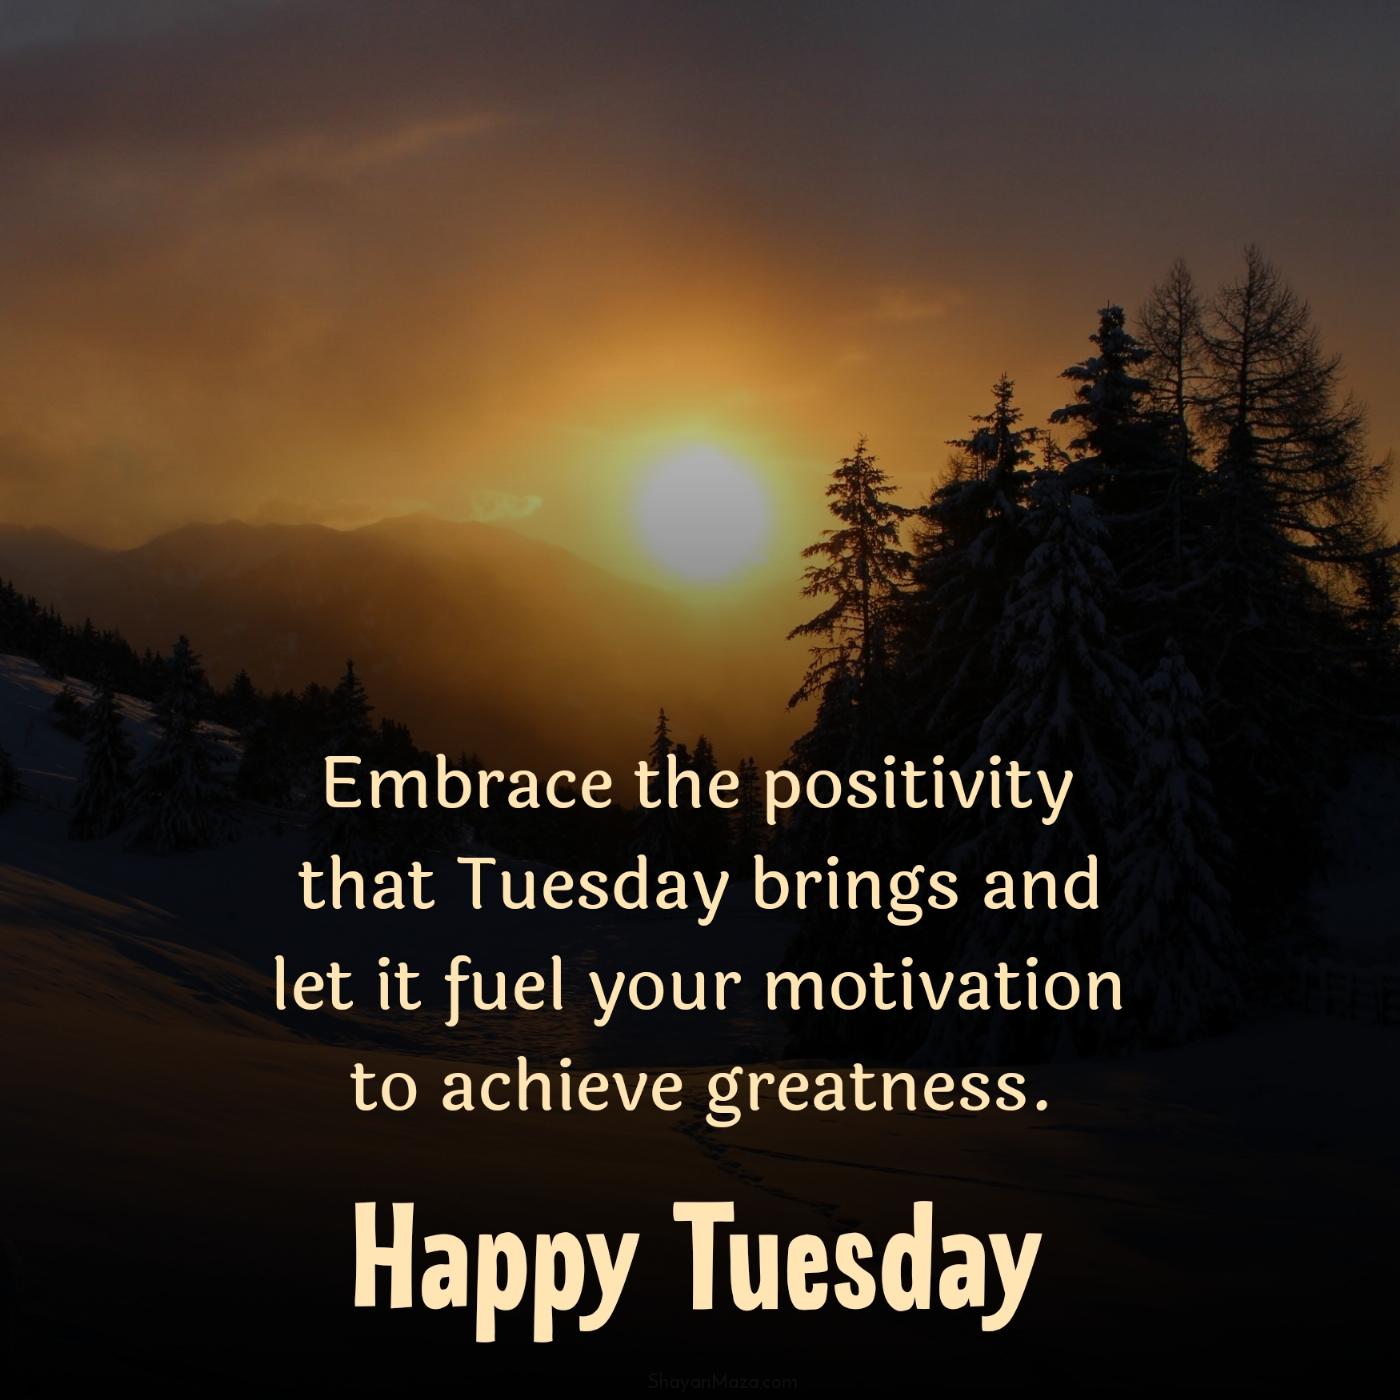 Embrace the positivity that Tuesday brings and let it fuel your motivation